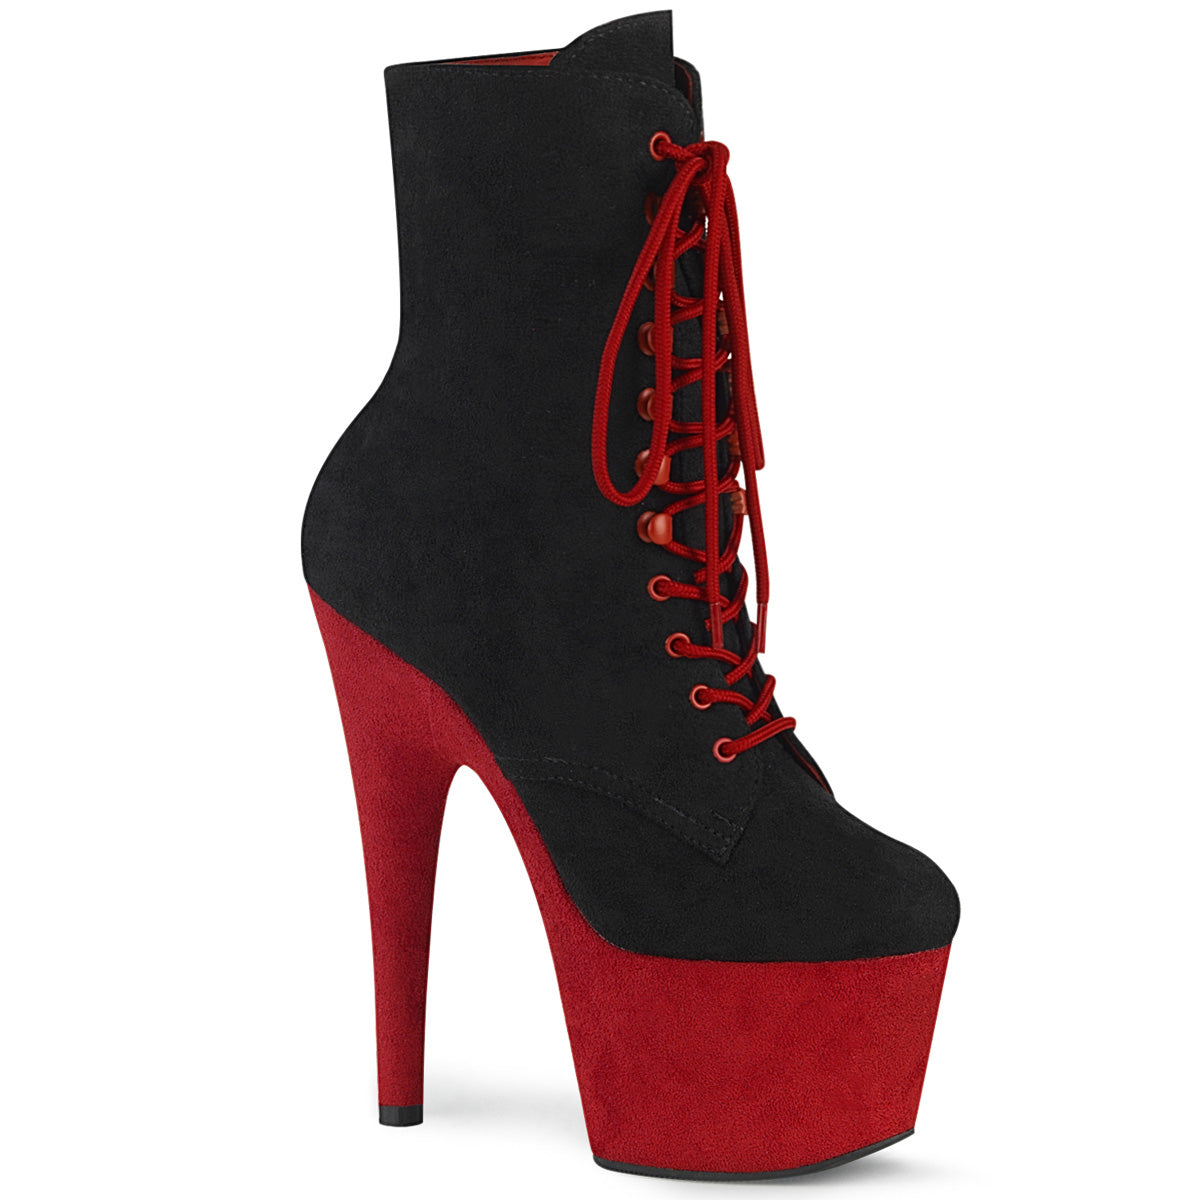 Adore Platform Lace-Up Ankle Boot